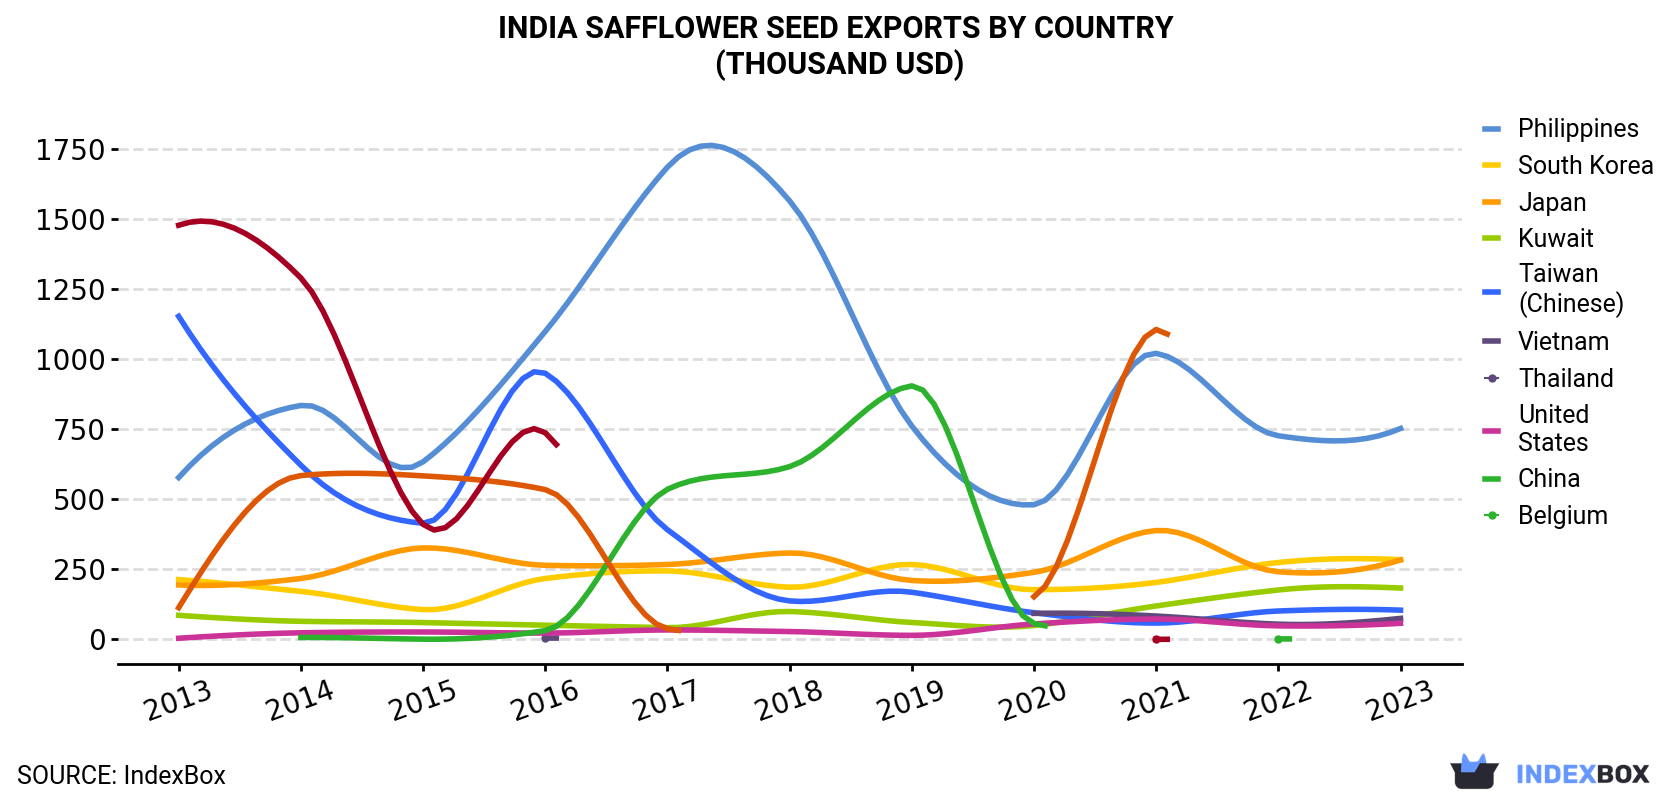 India Safflower Seed Exports By Country (Thousand USD)